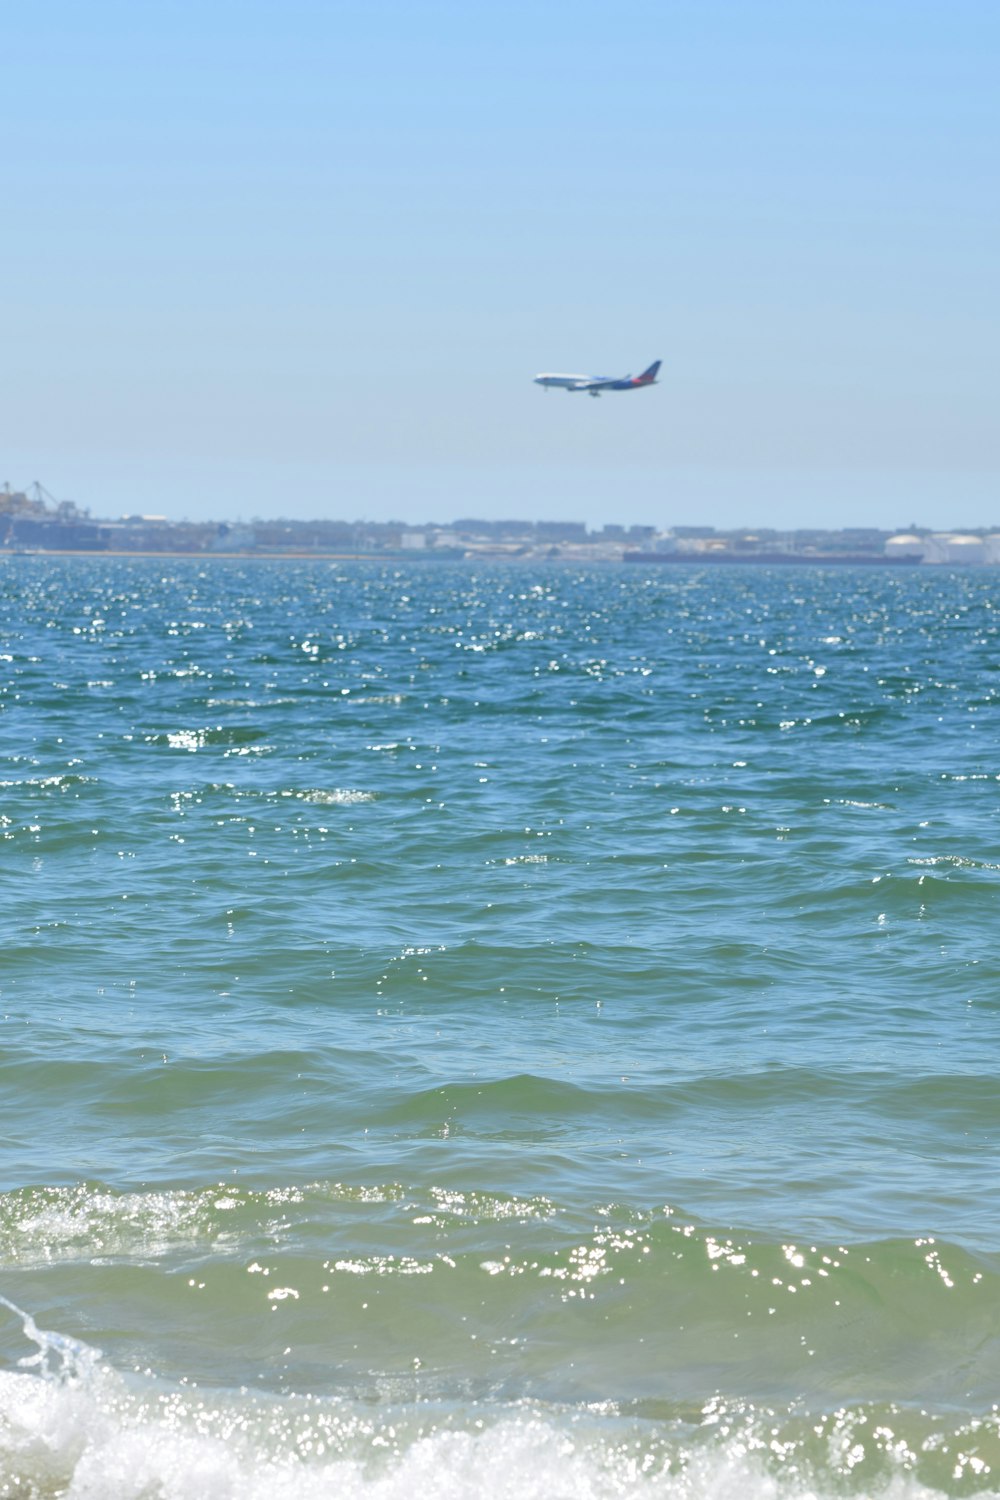 a large jetliner flying over a large body of water